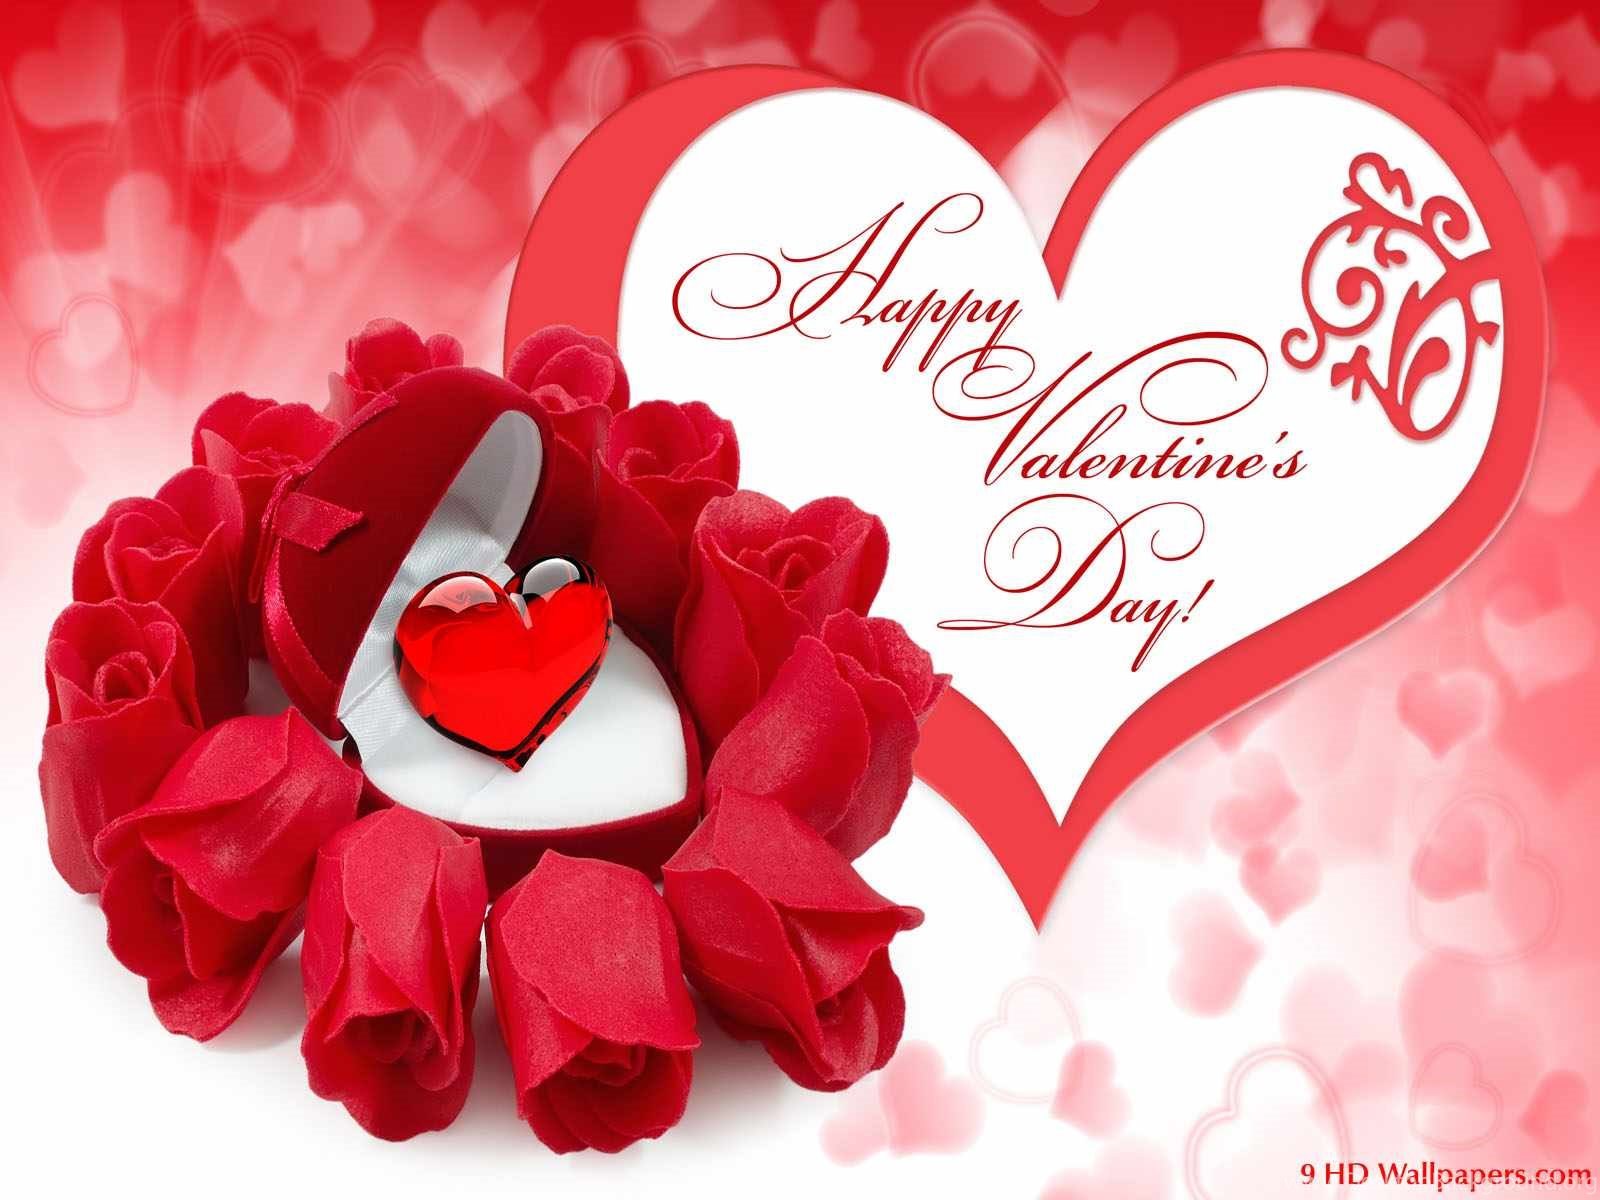 Download Best Happy Valentine Day Wallpaper For Kids The Quotes. Desktop Background